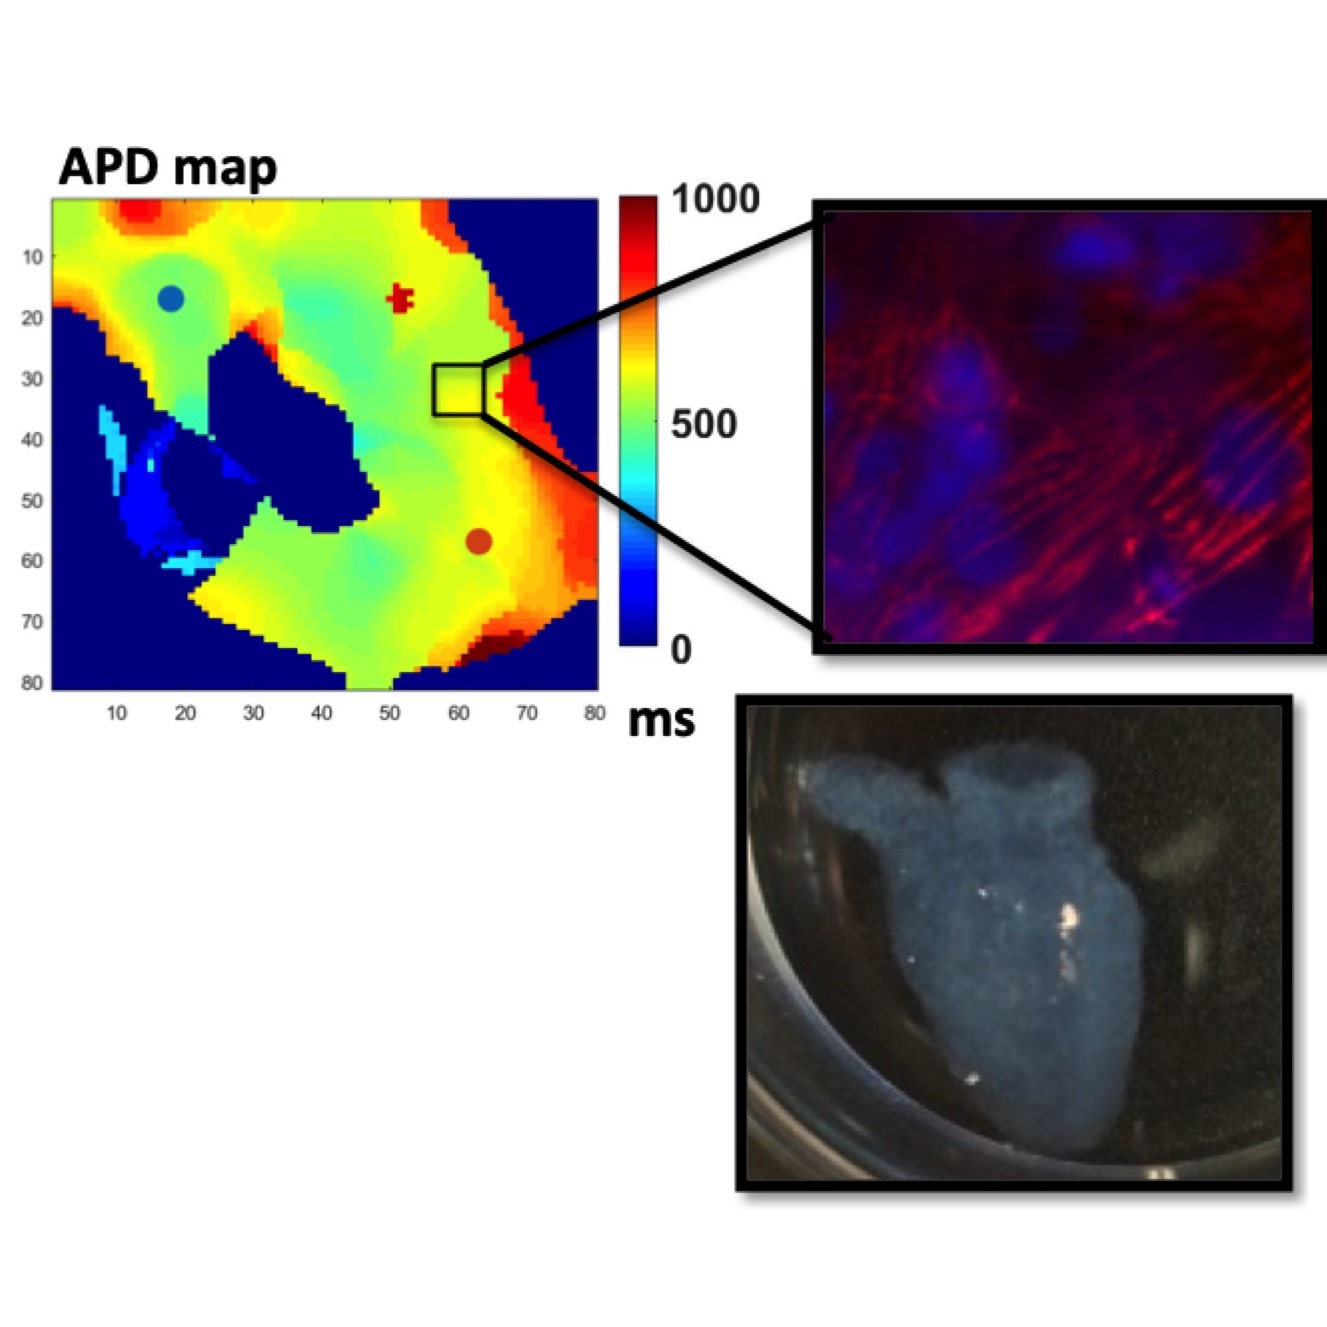 Compilation of three graphics: A graph that's an ADP map with an ms scale of 0 to 1000. A second purplish graphic taken with imaging technology shows a zoomed-in portion of the ADP map. Also an image of a 3-D printed tissue.